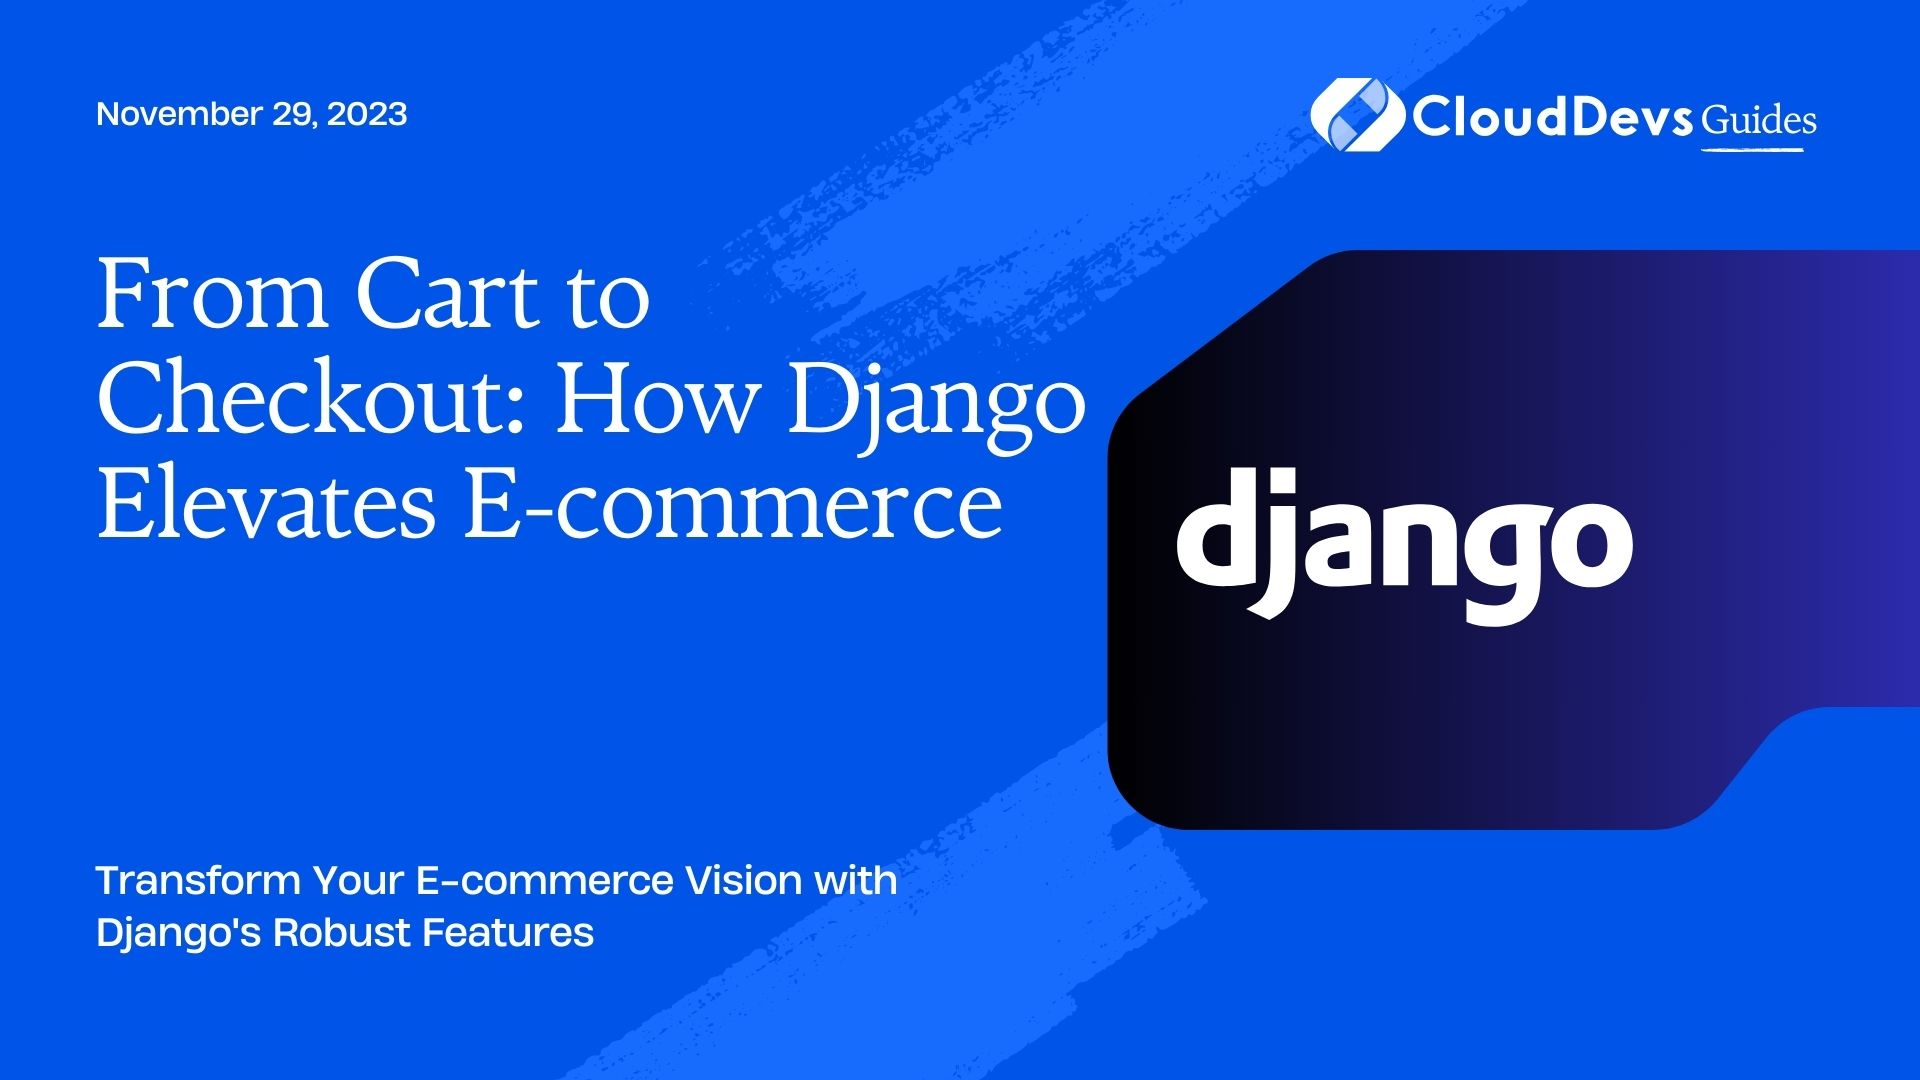 From Cart to Checkout: How Django Elevates E-commerce